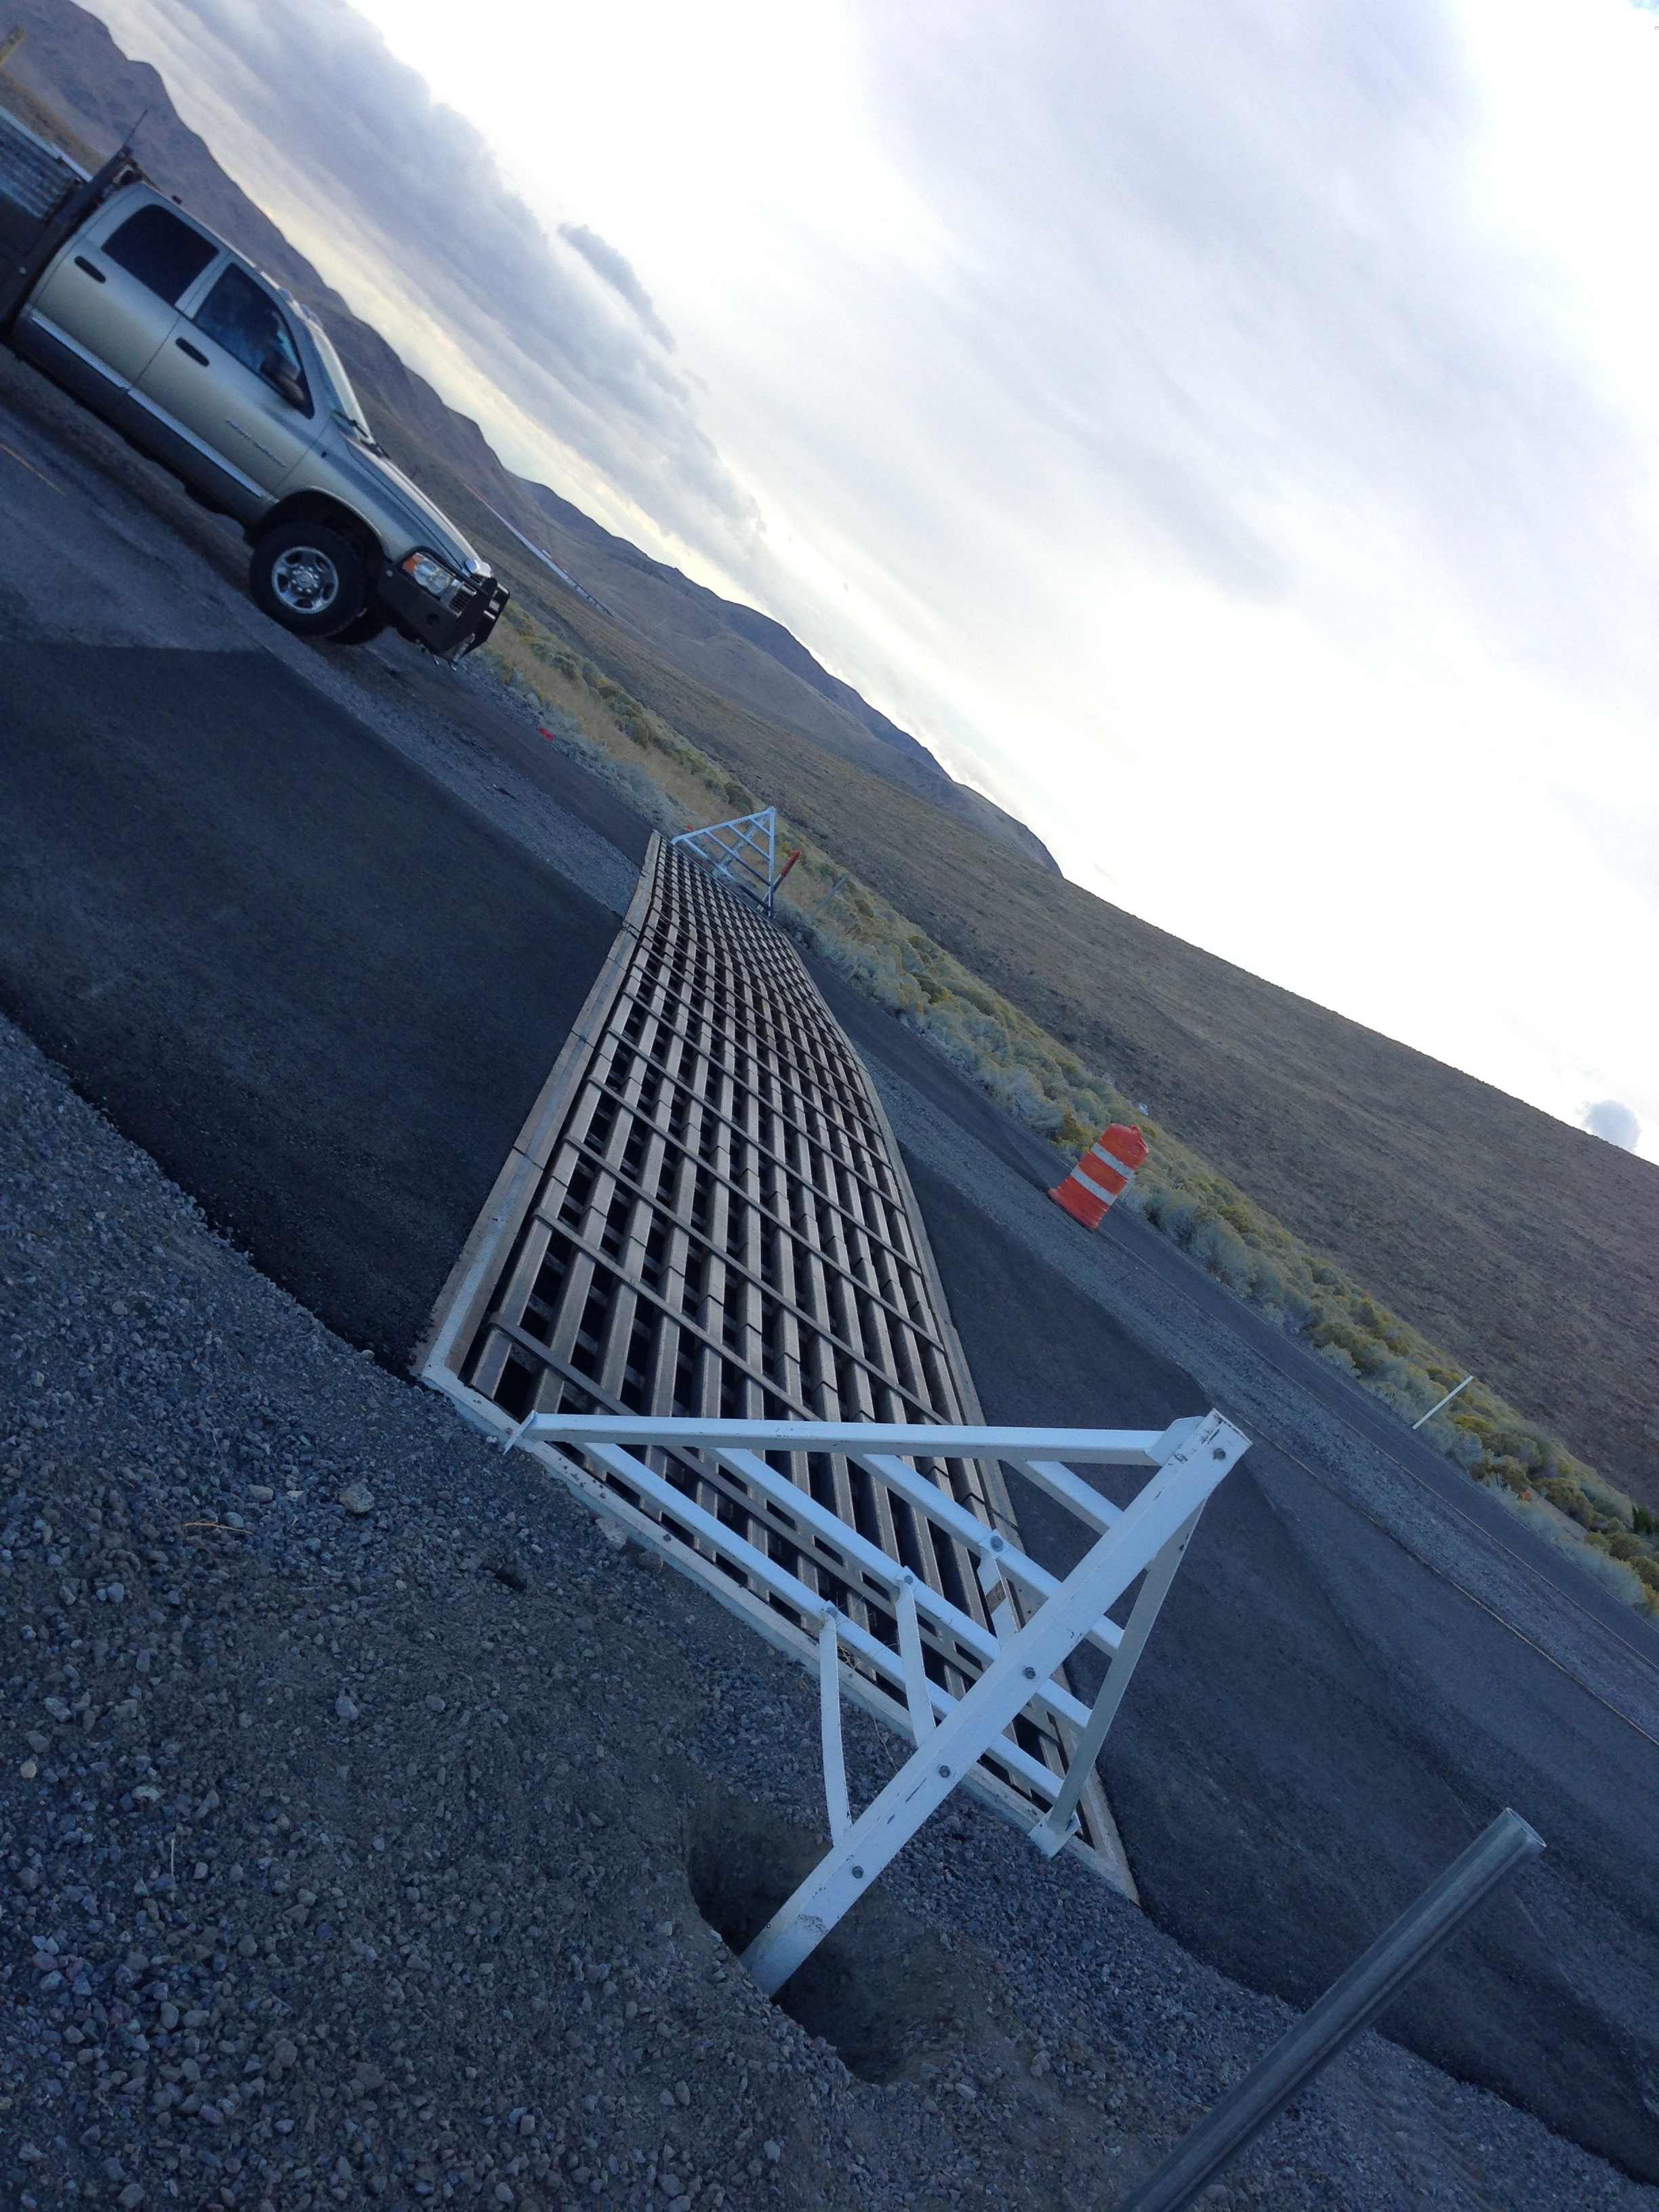 Cattle guards